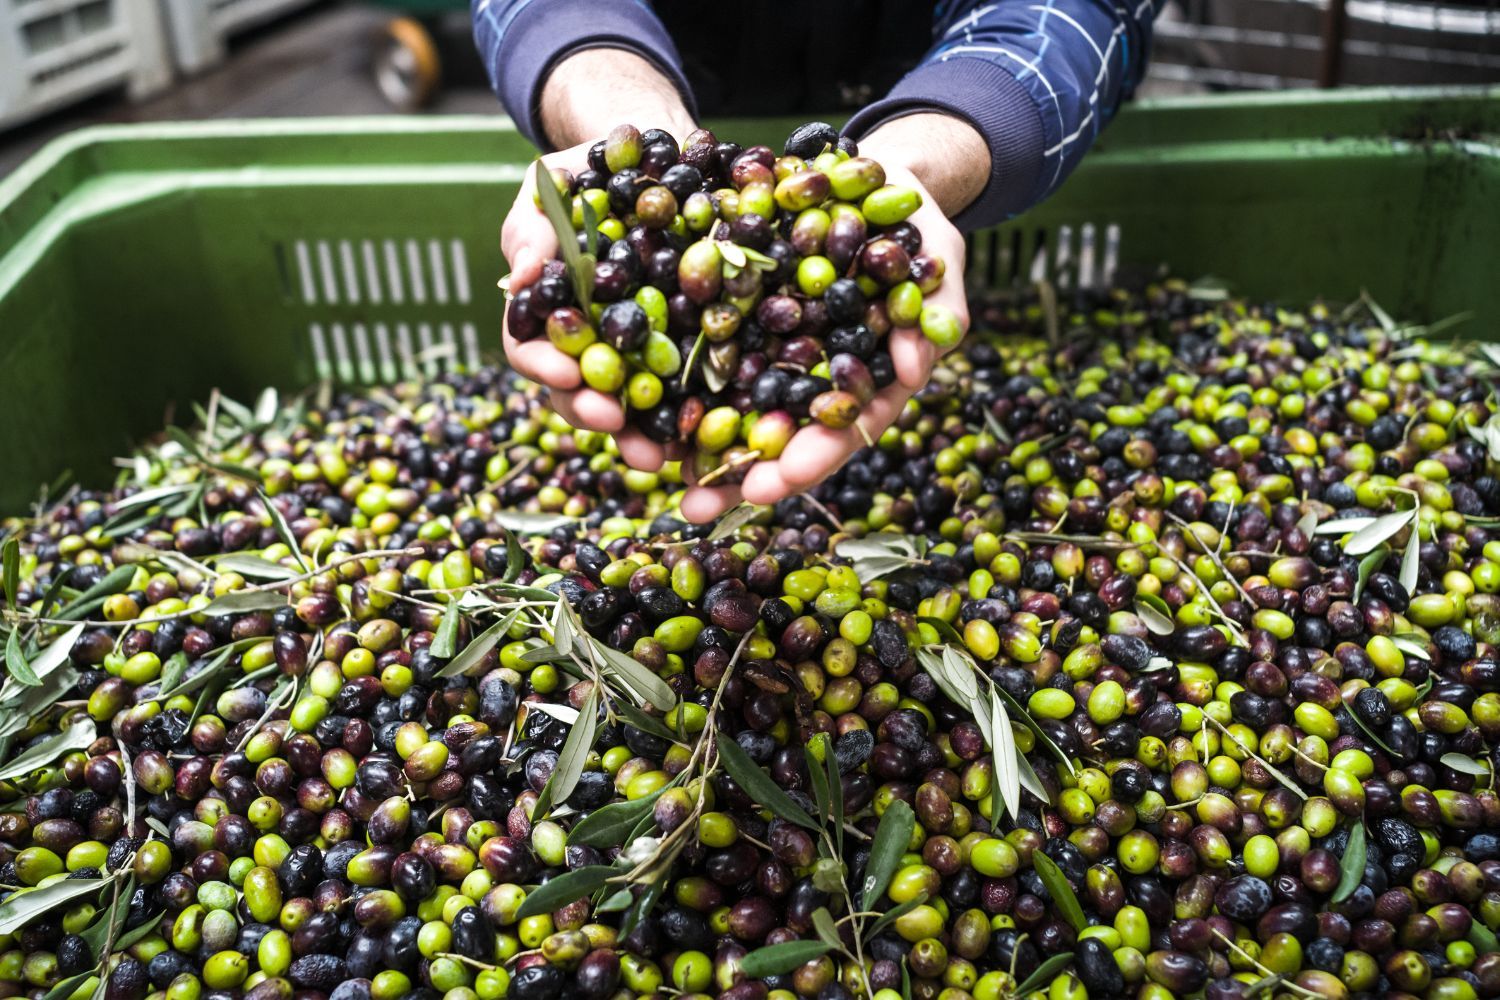 Health Benefits of Olive Oil: Why It's Good for You